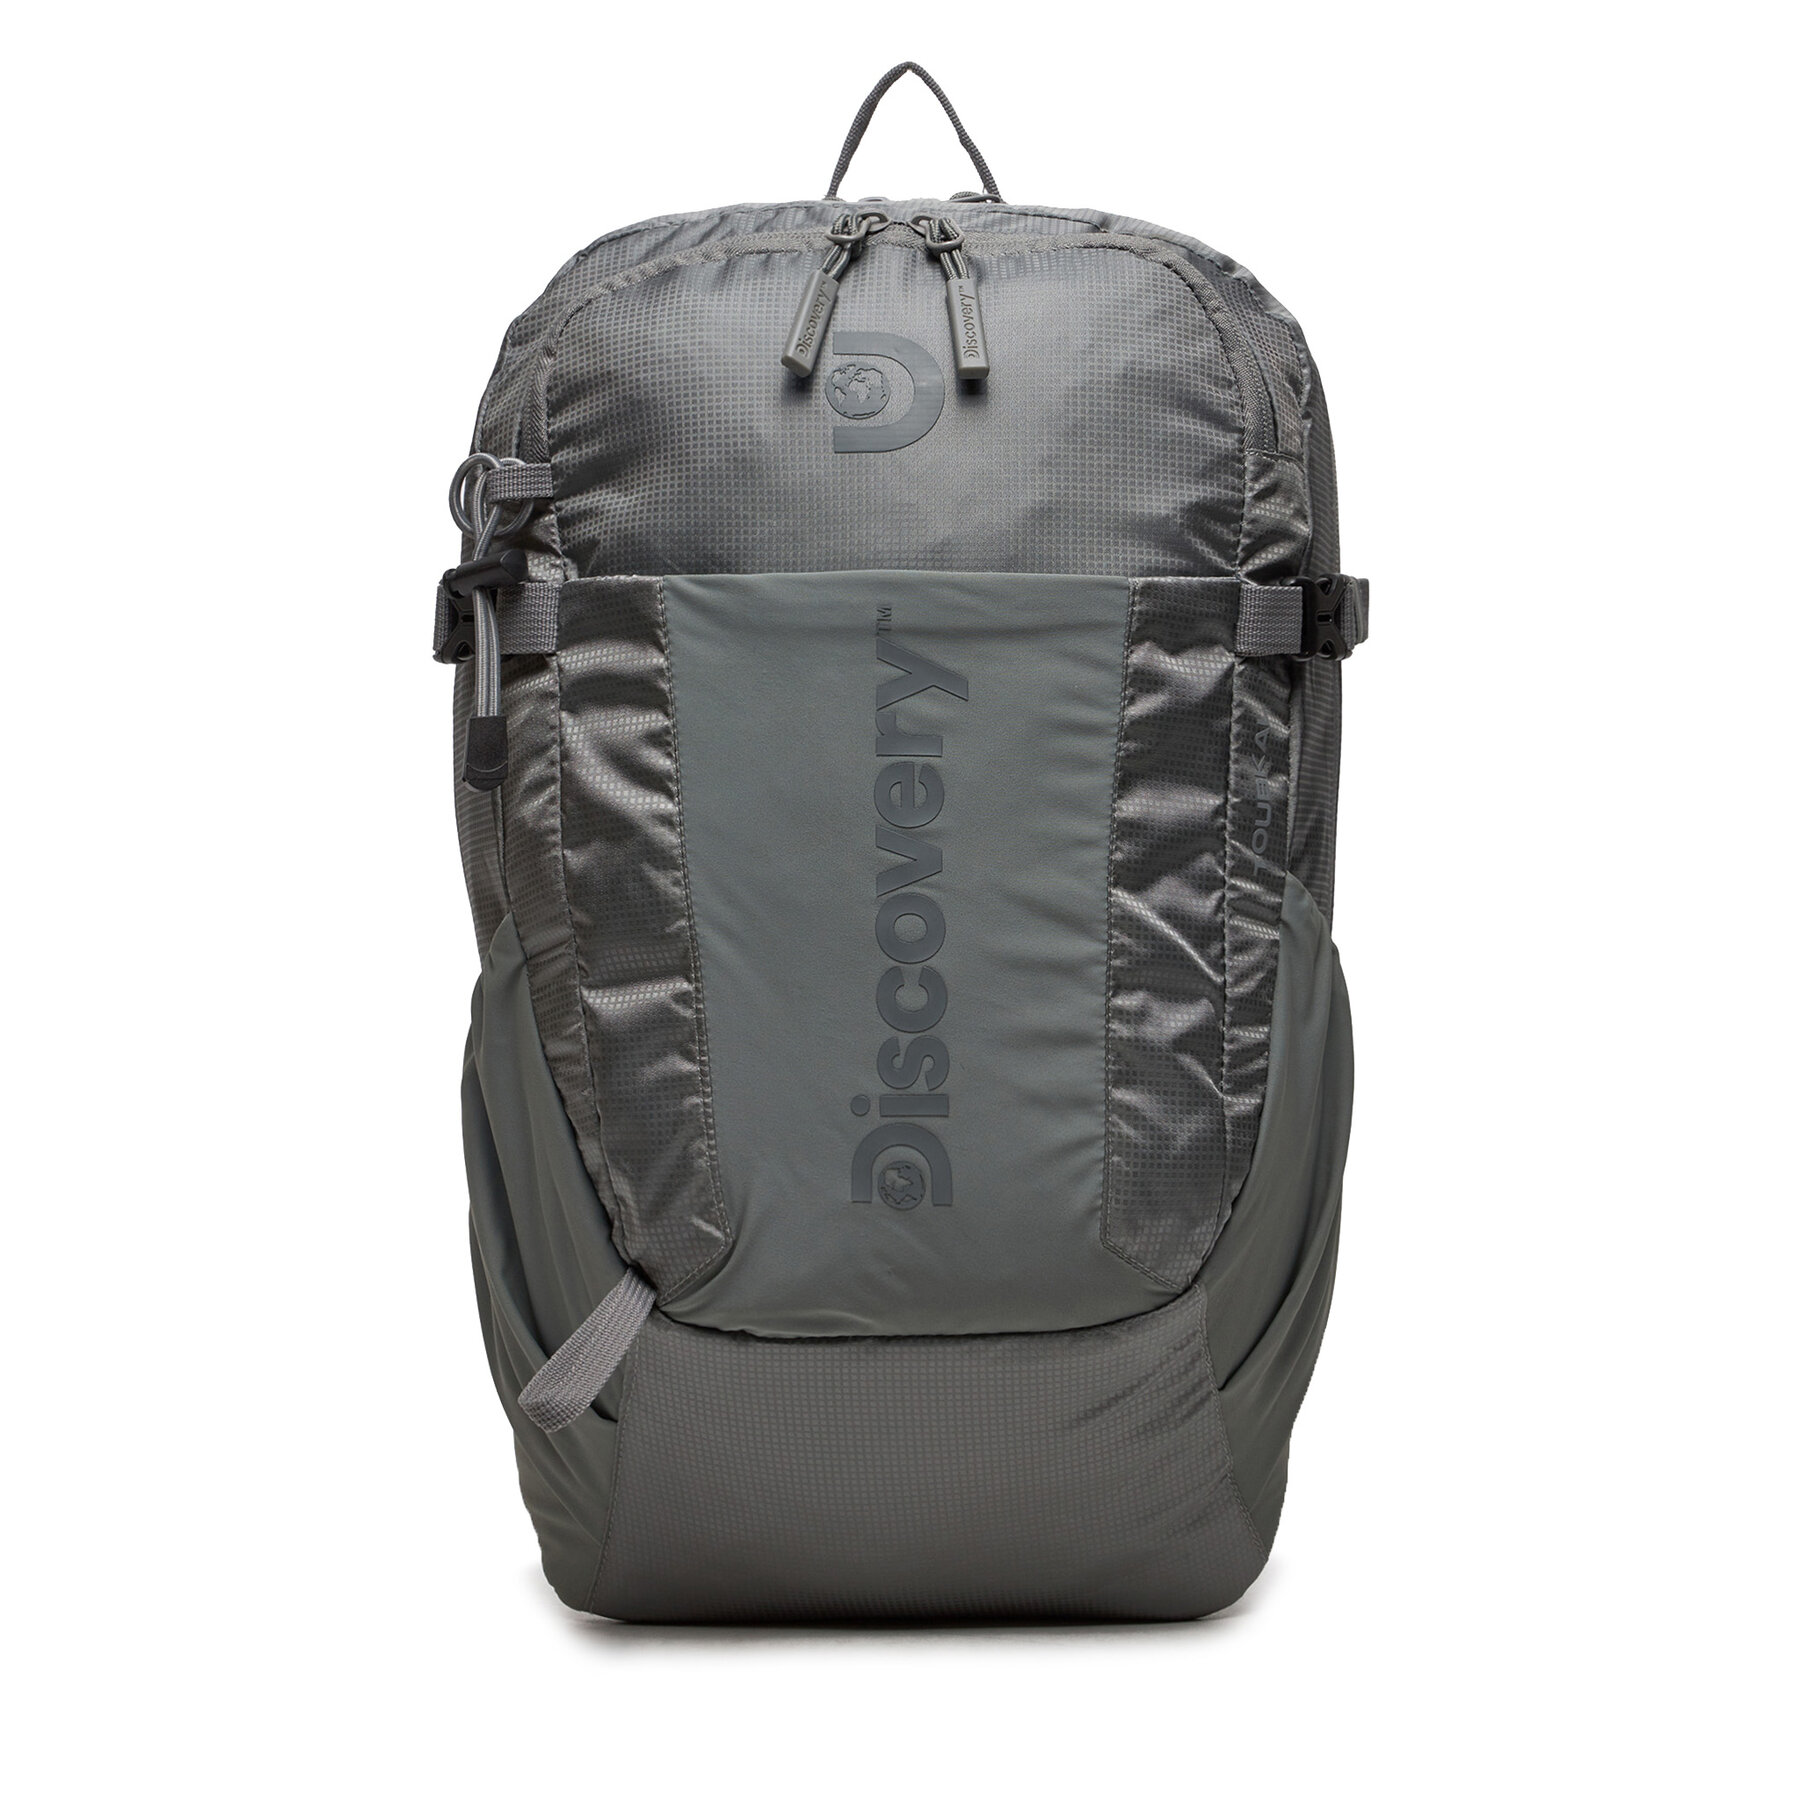 Rucksack Discovery Toubkal 18 D00611.22 Grey von Discovery